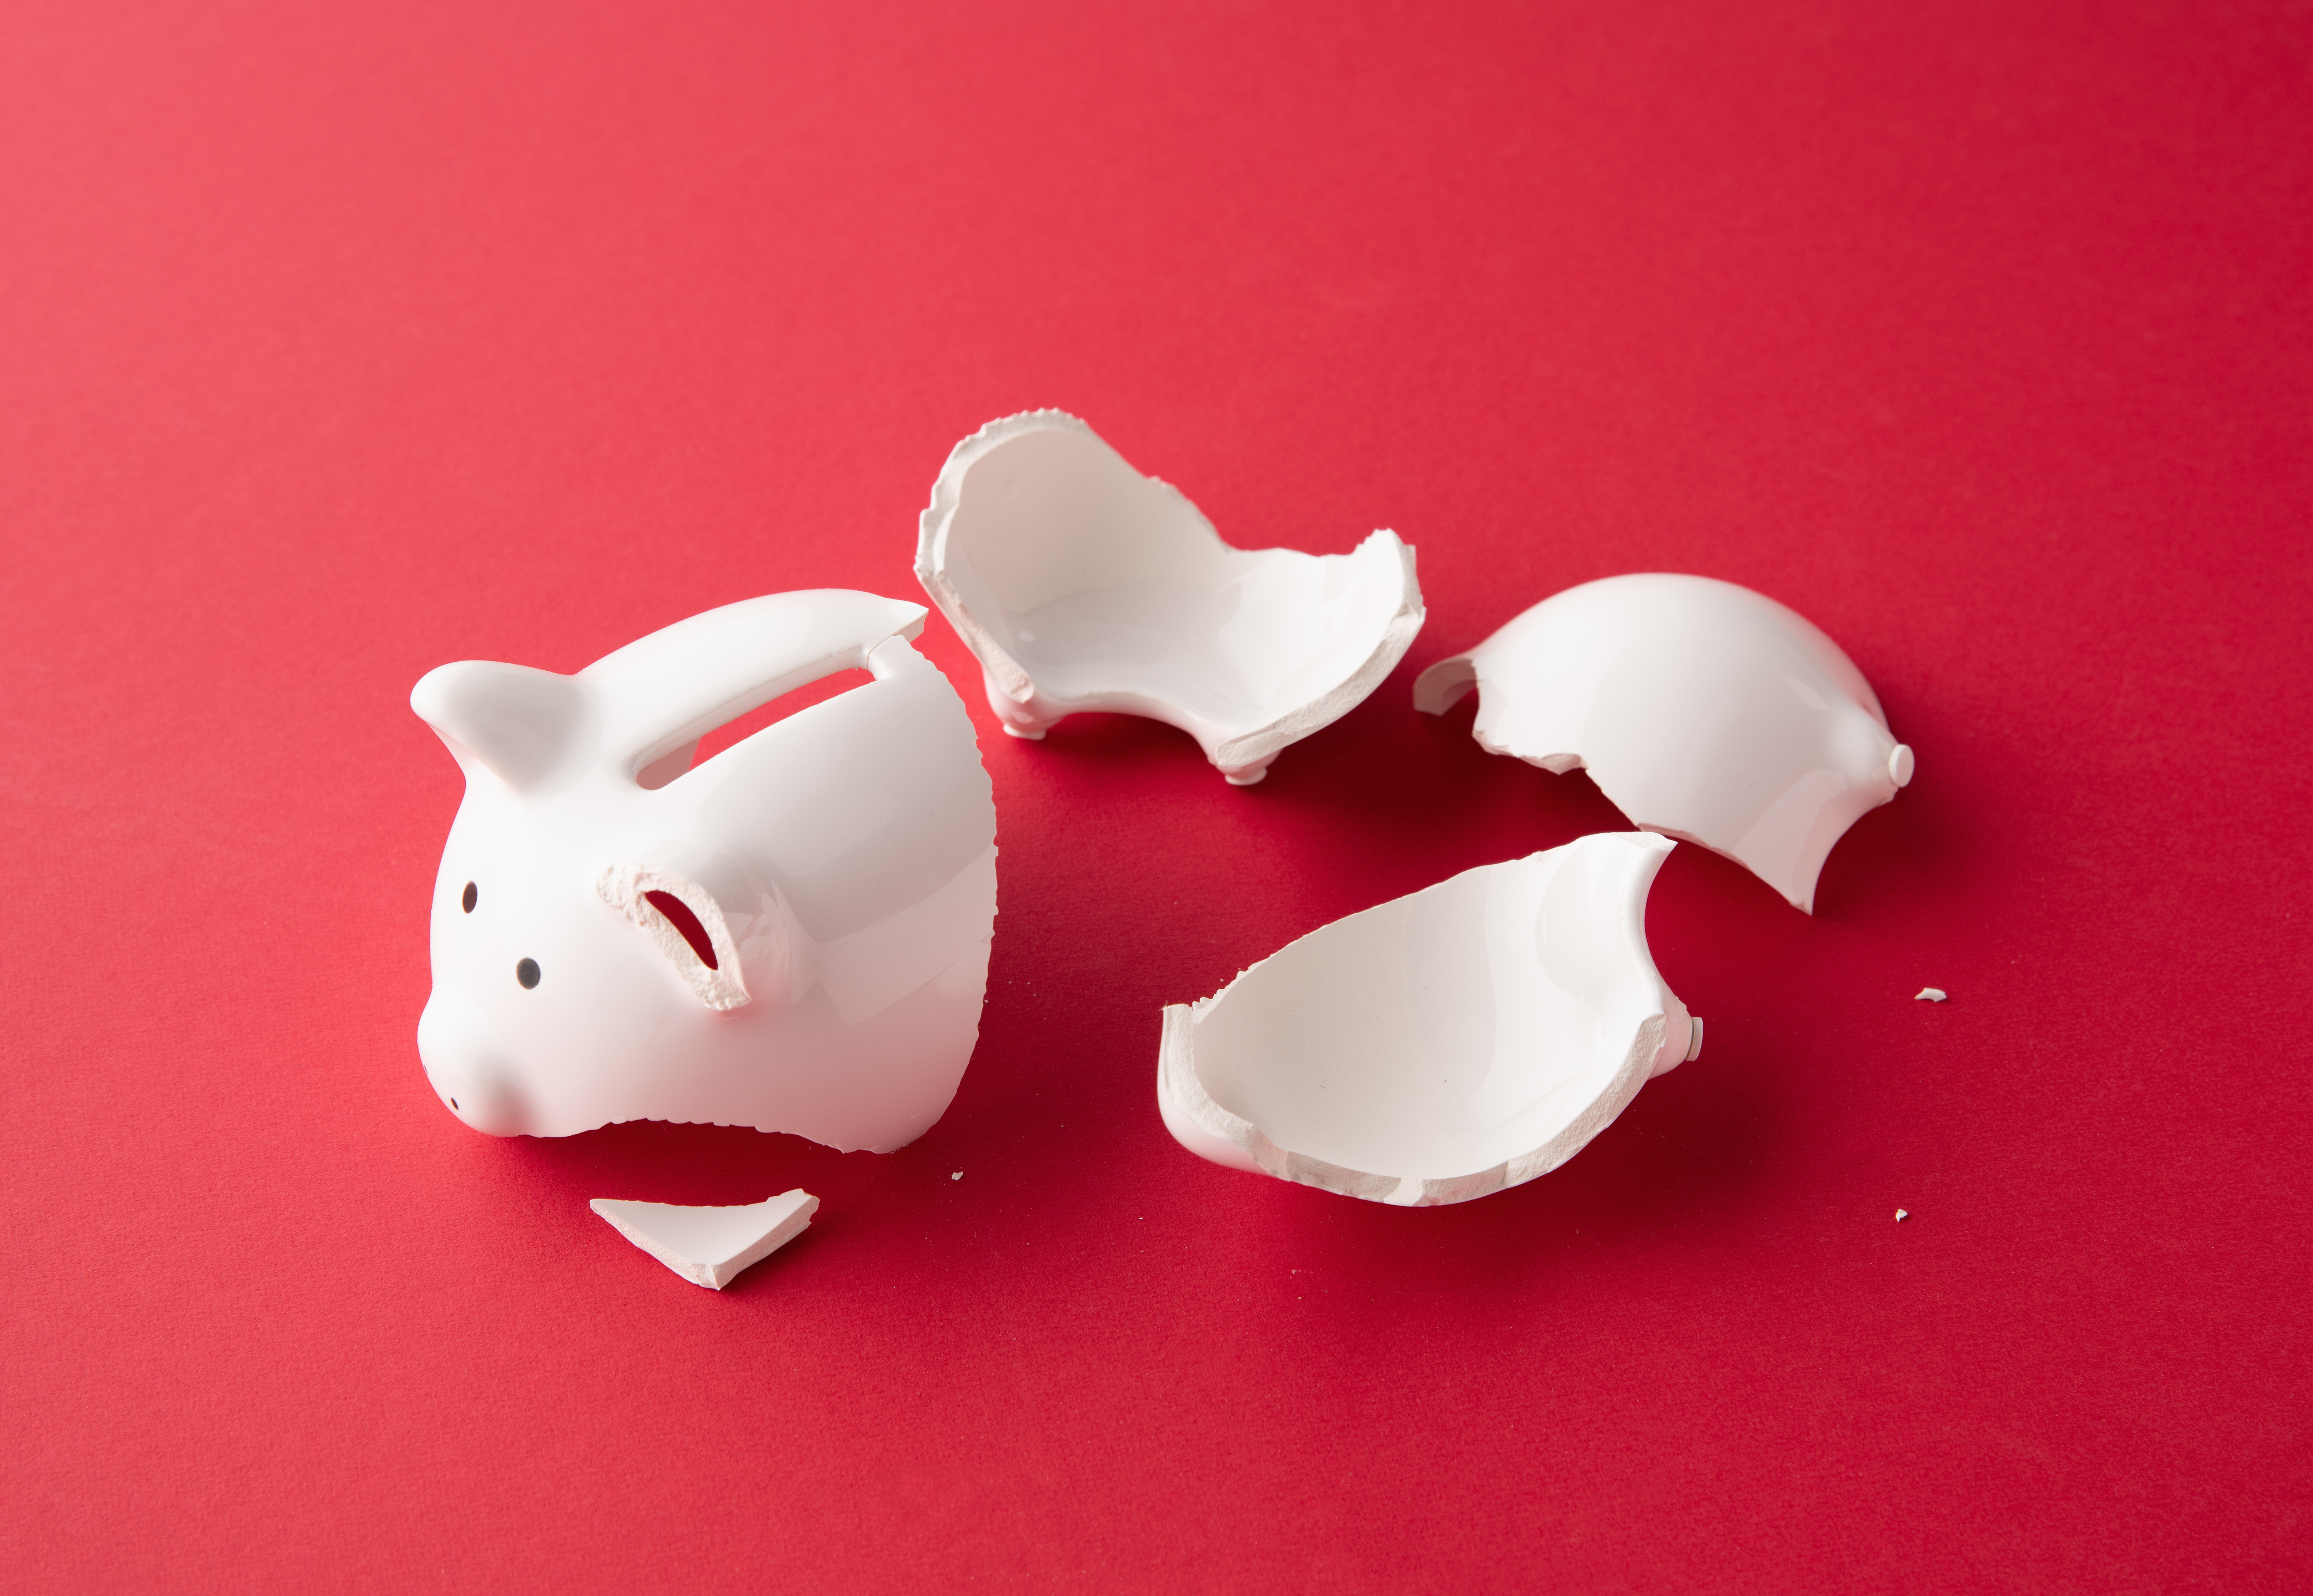 Image of a broken white piggy bank on a red background.